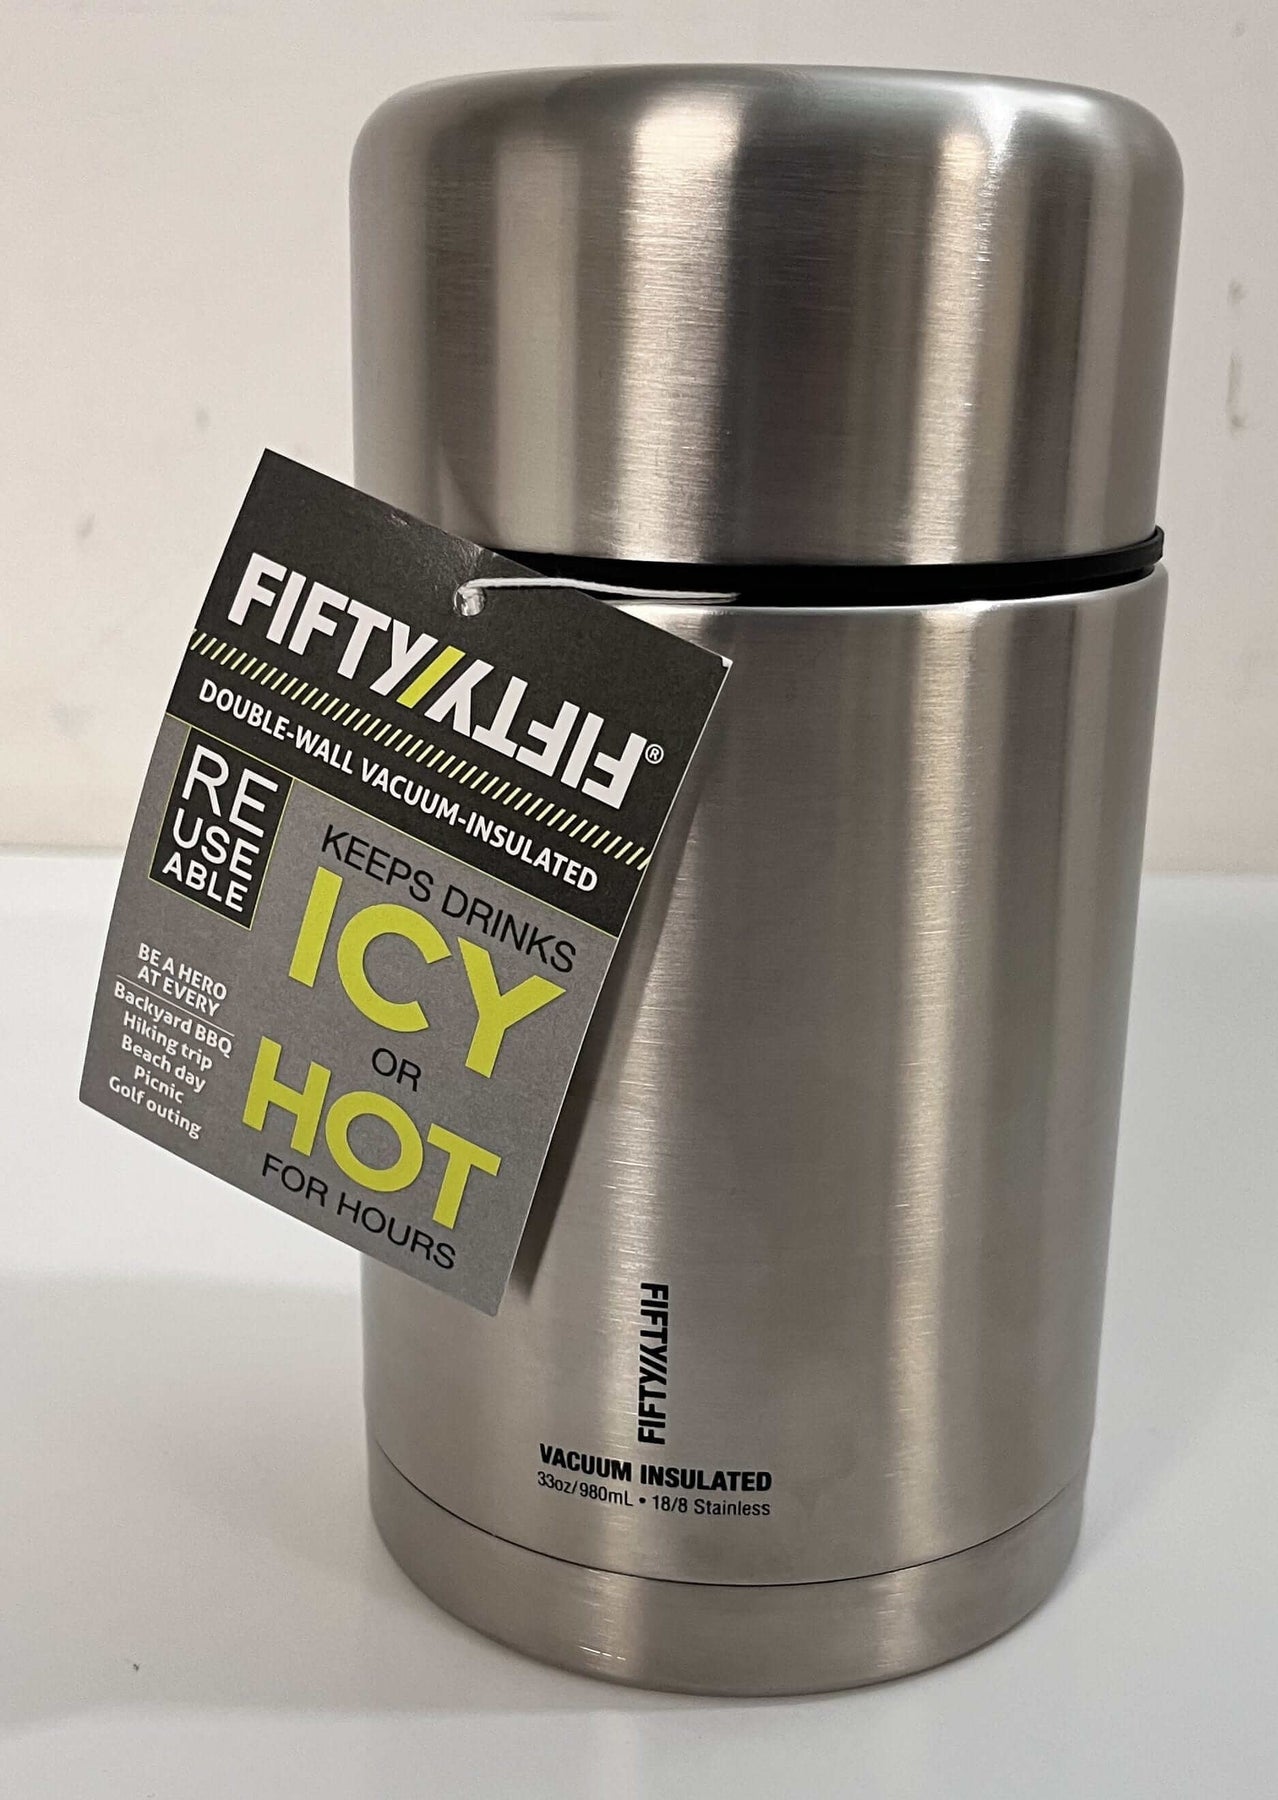 https://phentersales.com/cdn/shop/files/fifty-fifty-vacuum-insulated-33-oz-stainless-steel-food-storage-container-51642777993444_1800x1800.jpg?v=1683743300